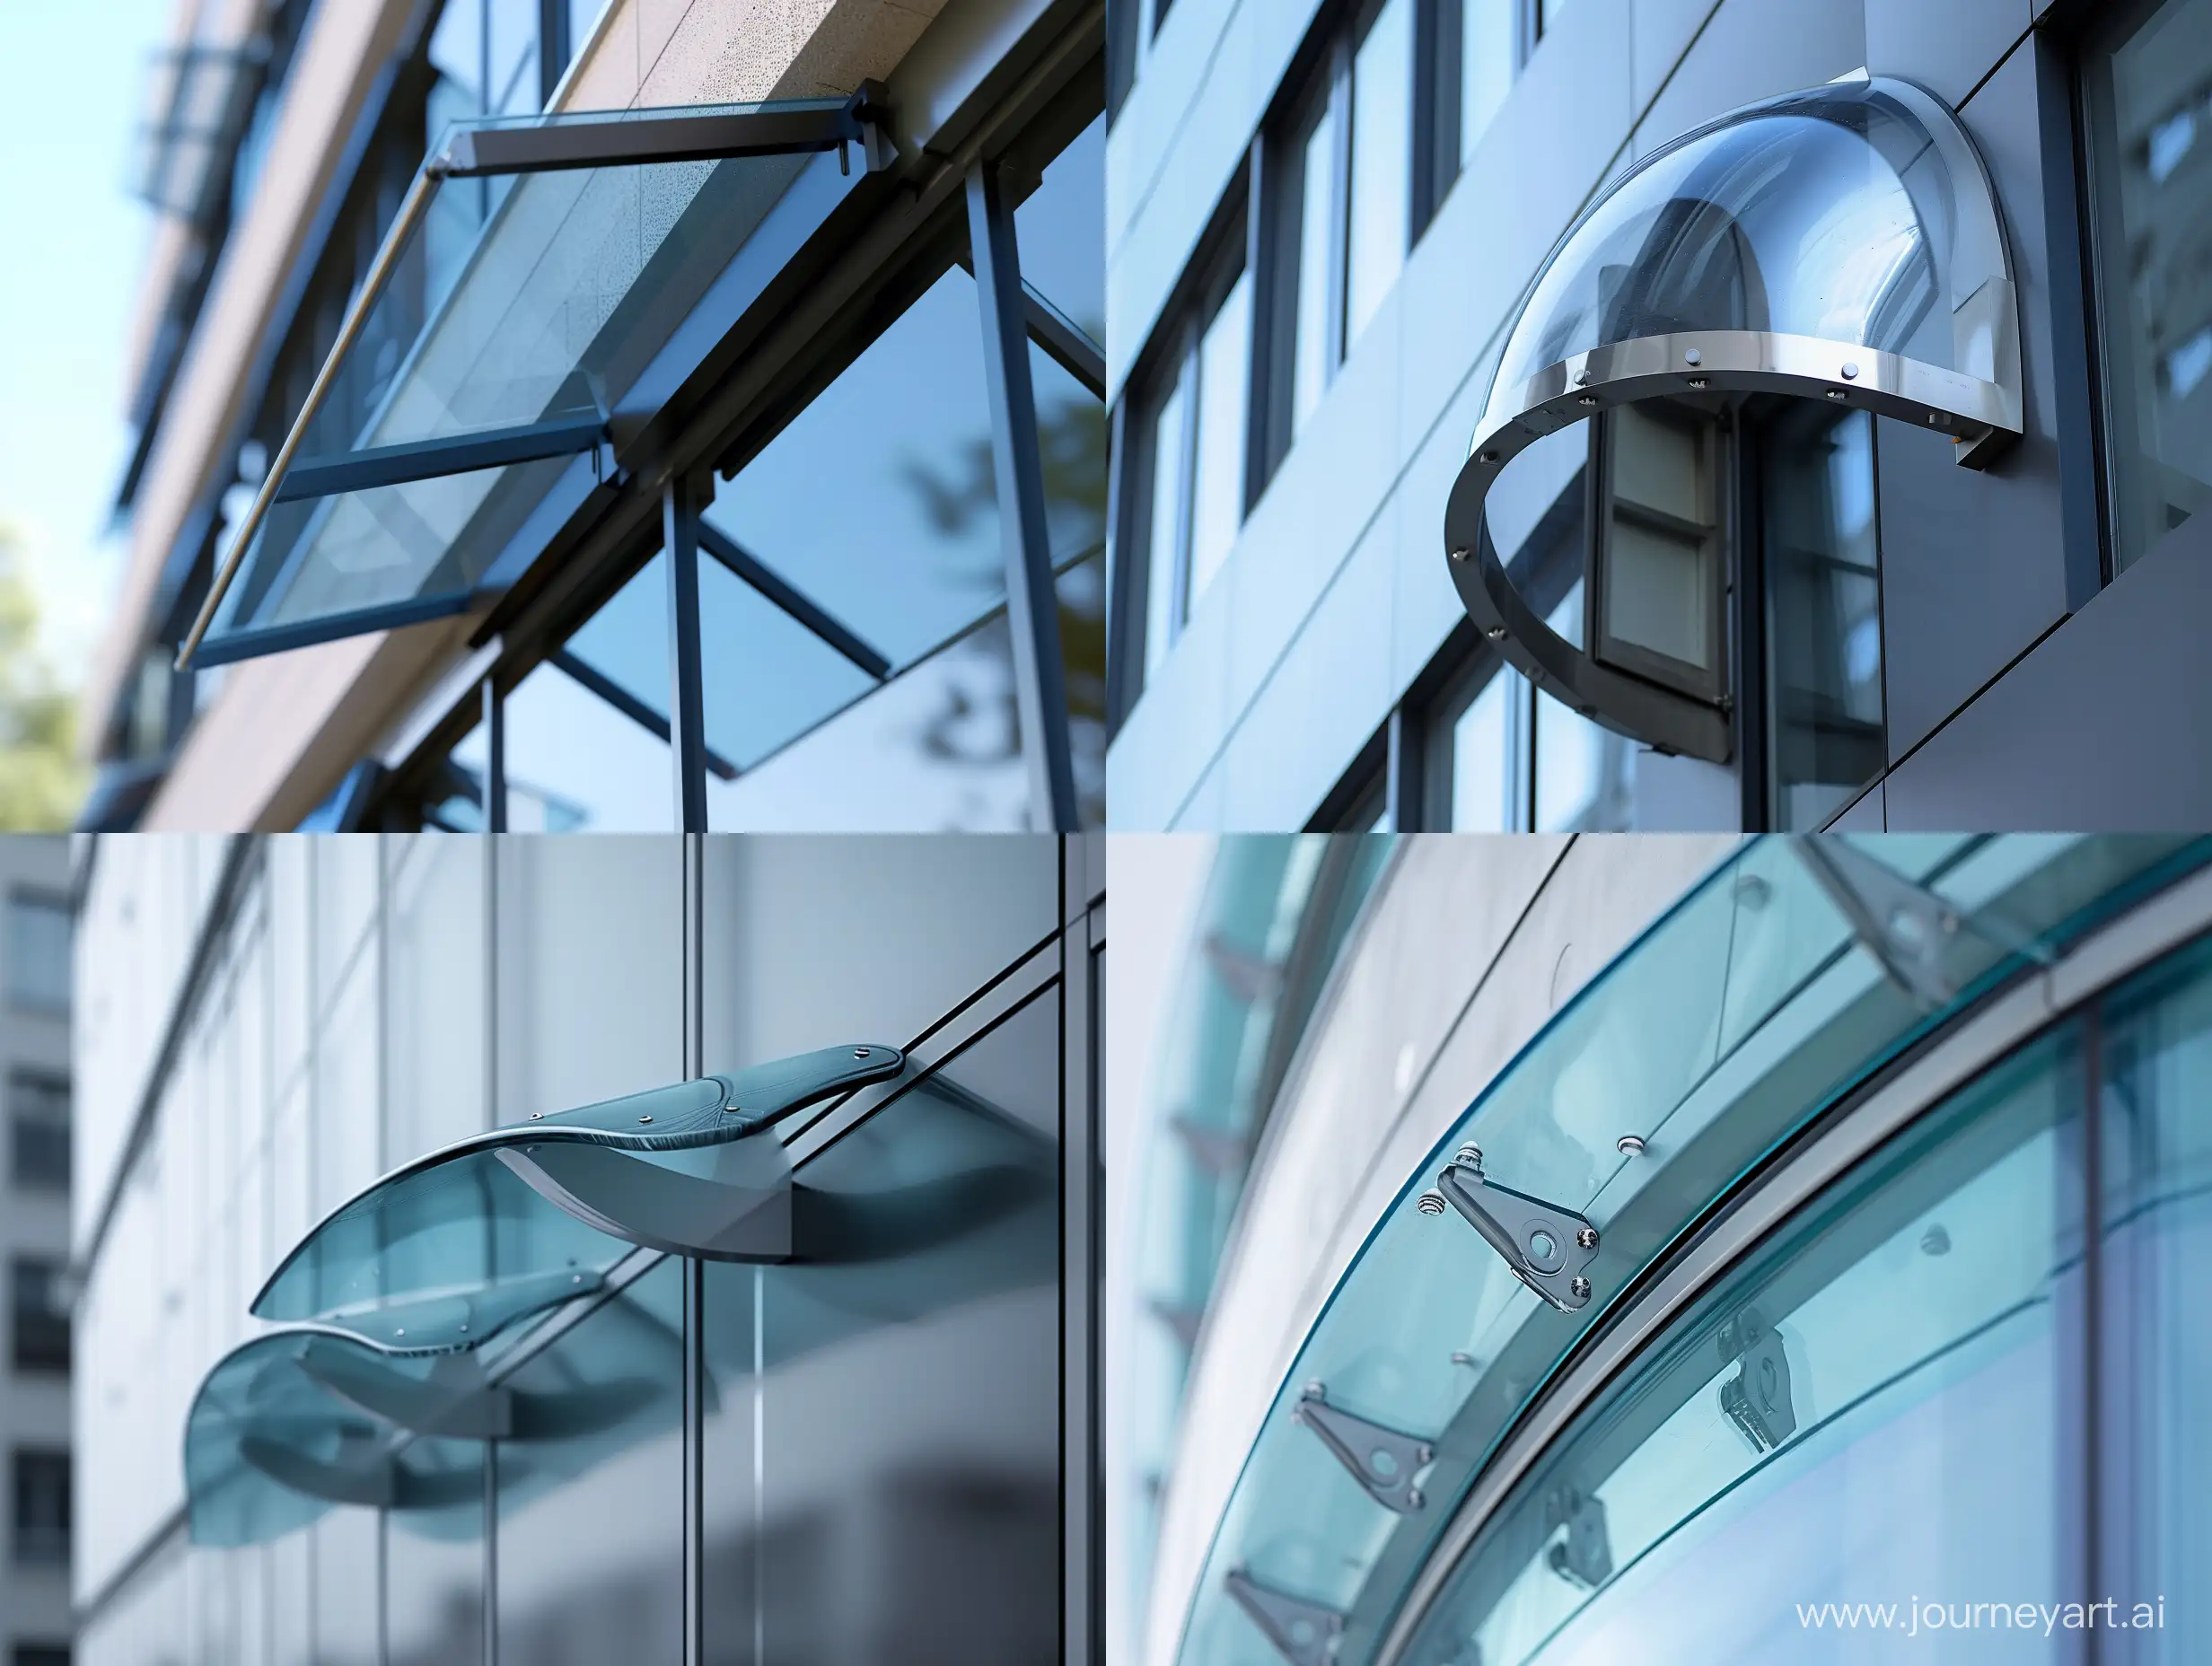 Architectural-Elegance-CloseUp-of-Photorealistic-Glass-Visor-on-Building-Facade